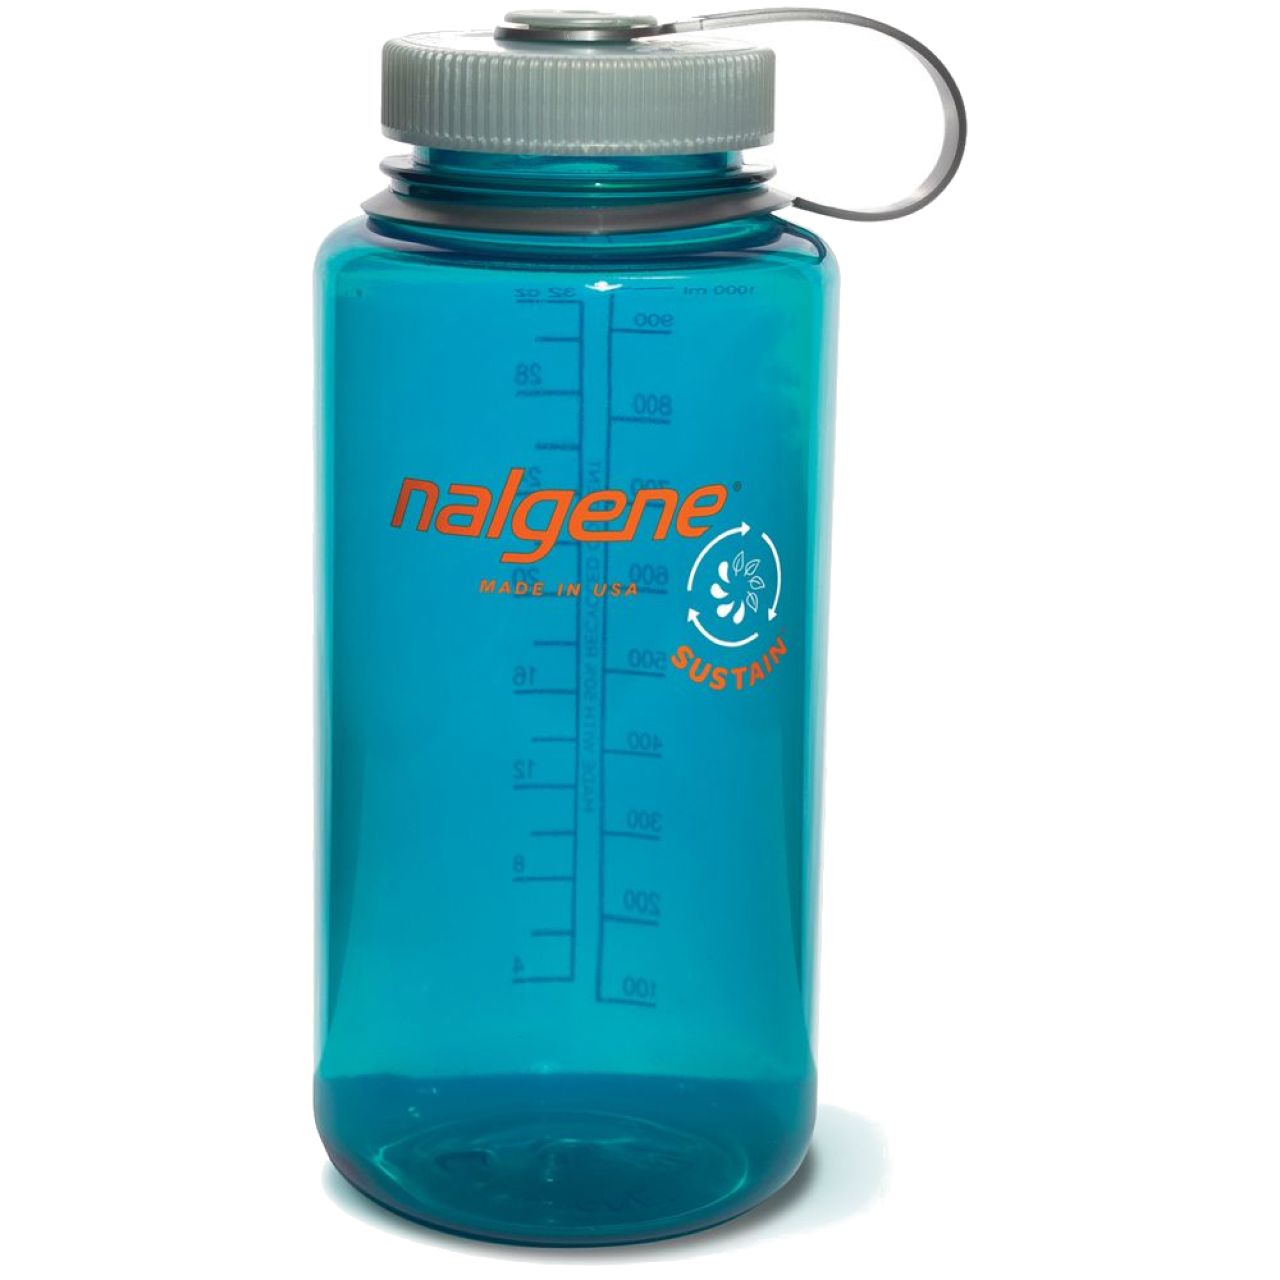 All-in-One Outdoor Water Bottle, Food Cup, Bowl, Waste Cleanup & Disposal Green / 2 Cup (500ml)